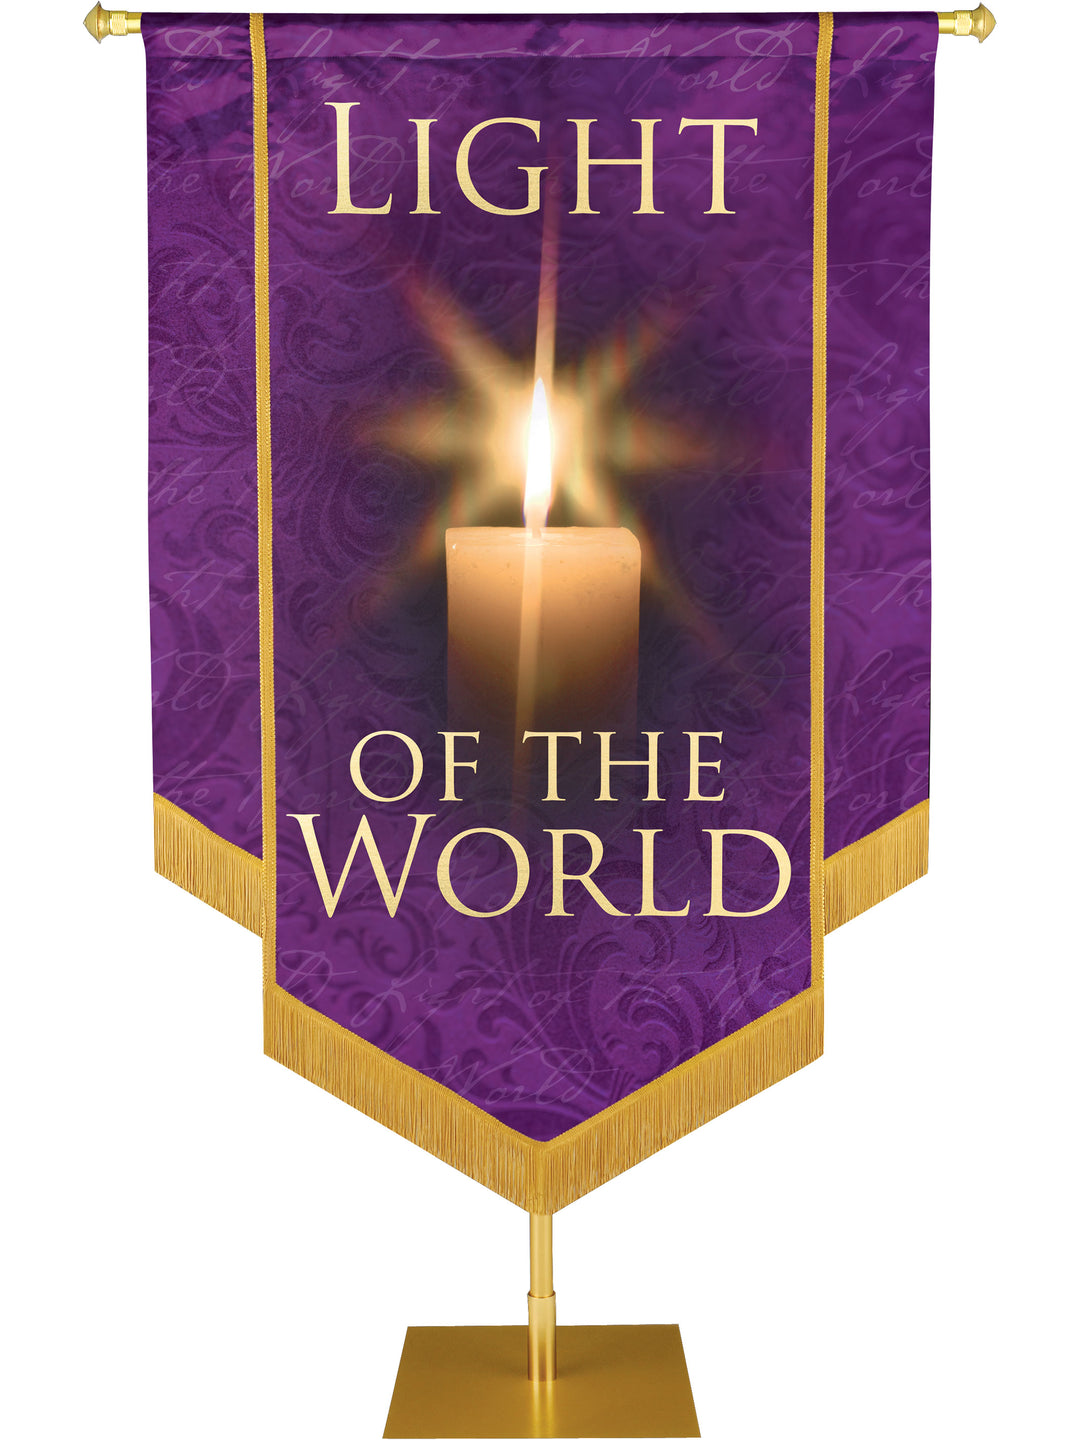 Names of Christ Light of the World Embellished Banner - Handcrafted Banners - PraiseBanners